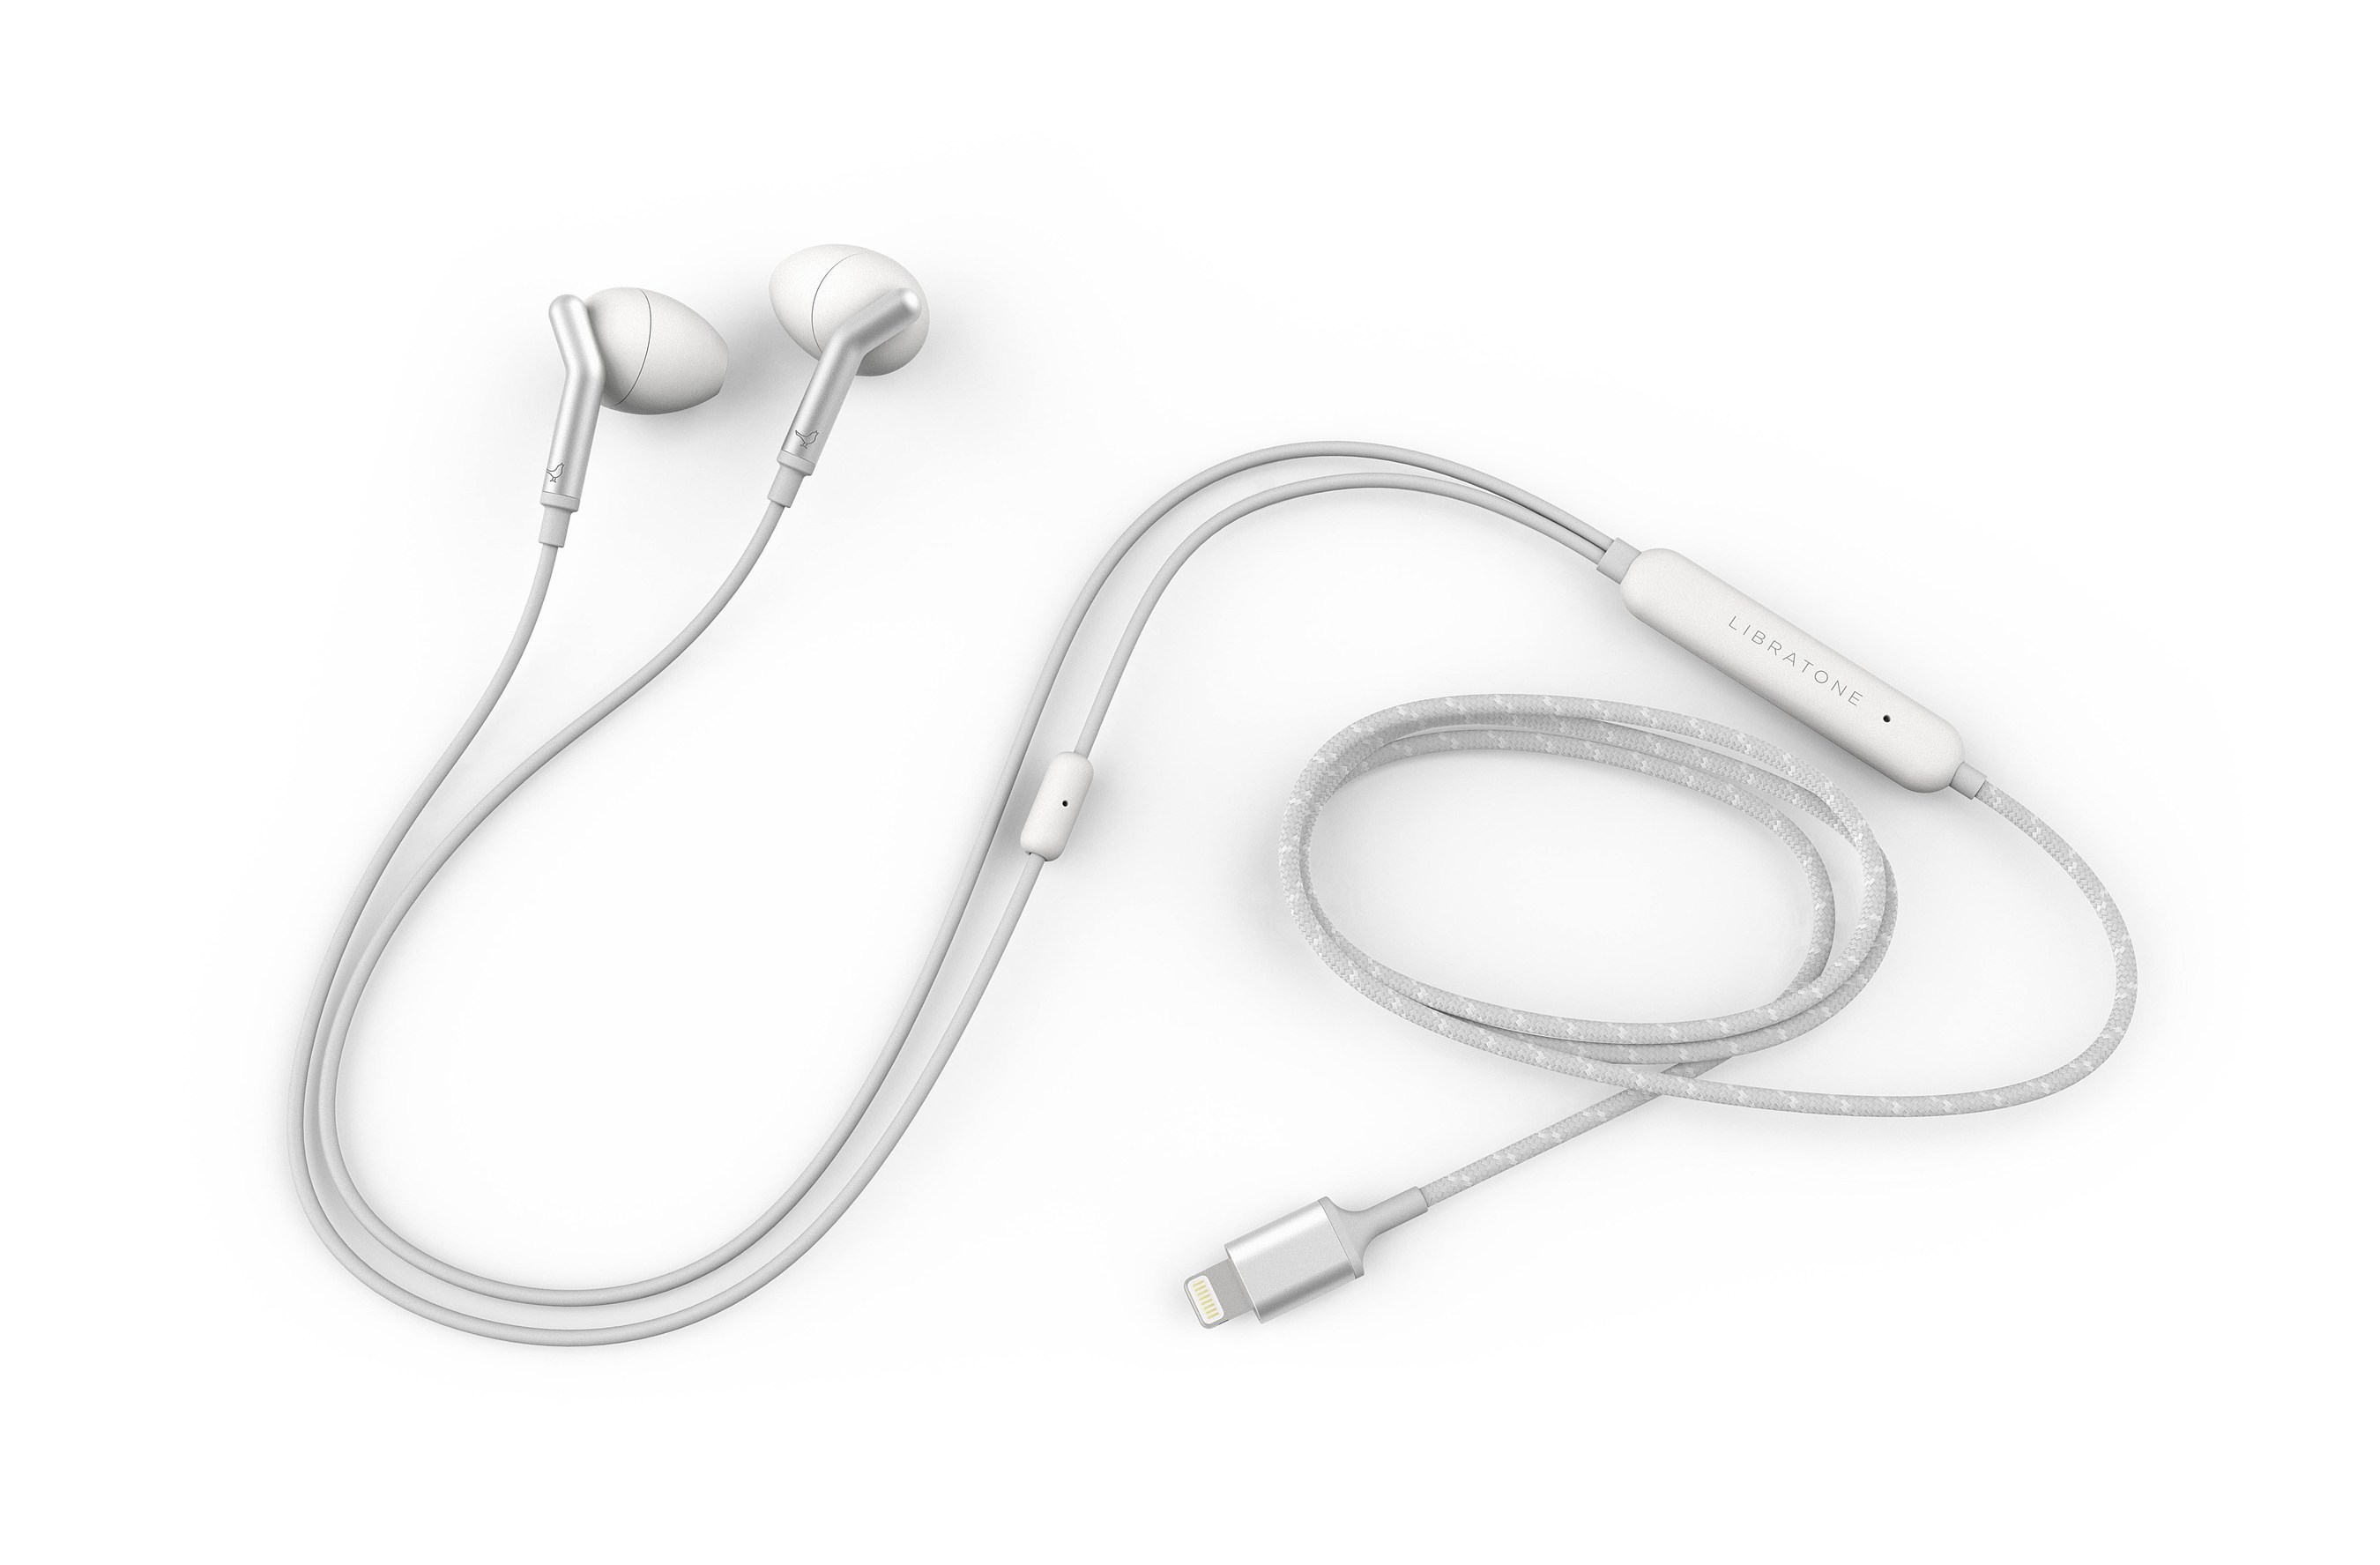 Libratone_Q_Adapt_In_Ear_earbuds